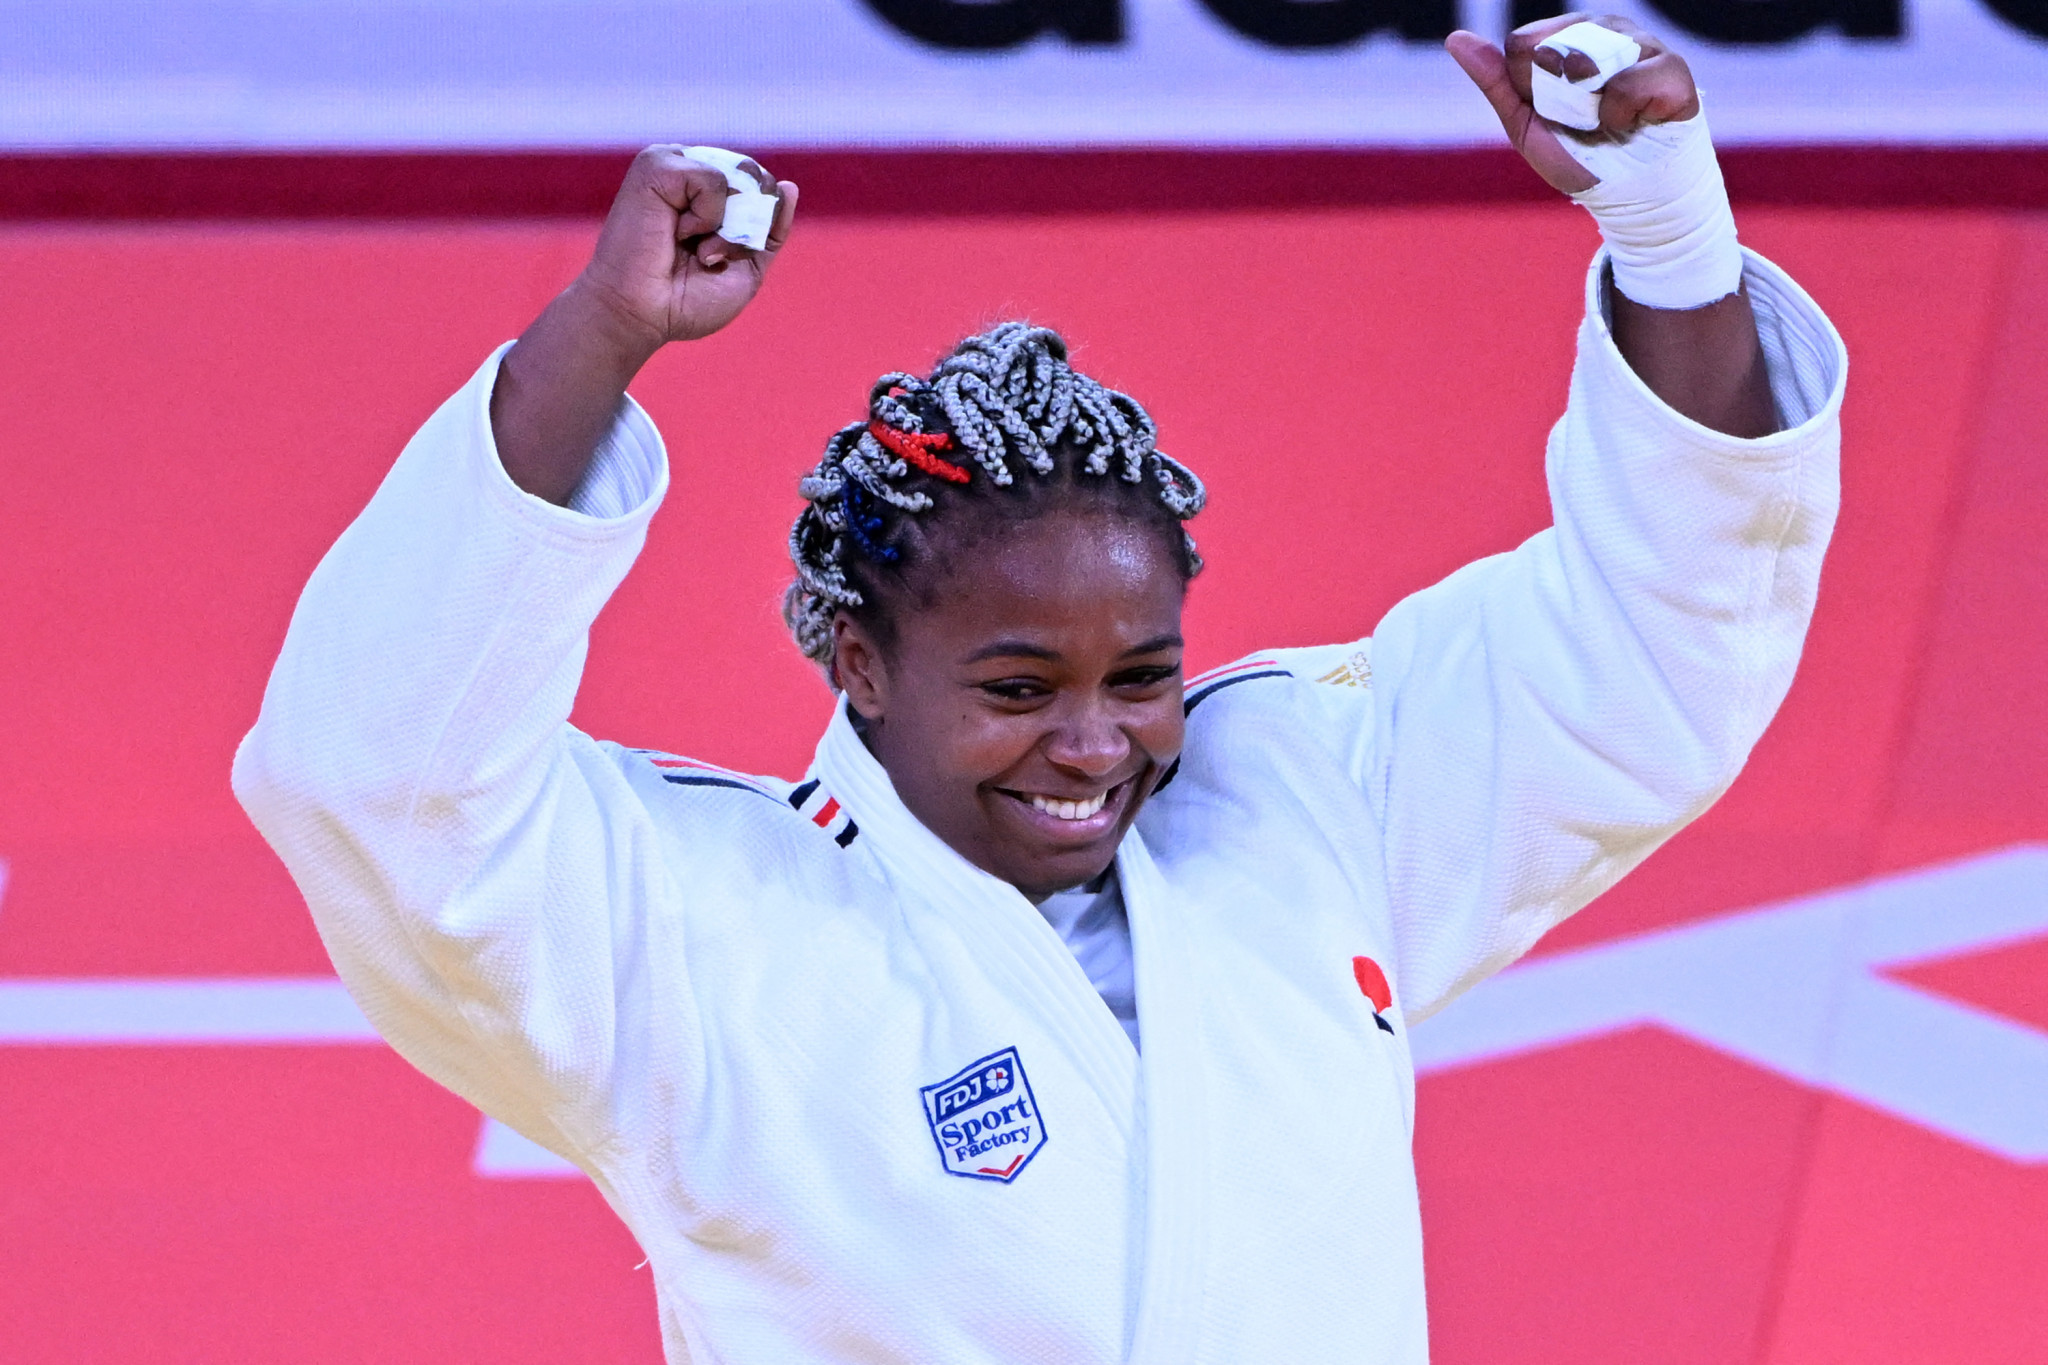 Dicko and Granda win first French and Cuban golds at World Judo Championships